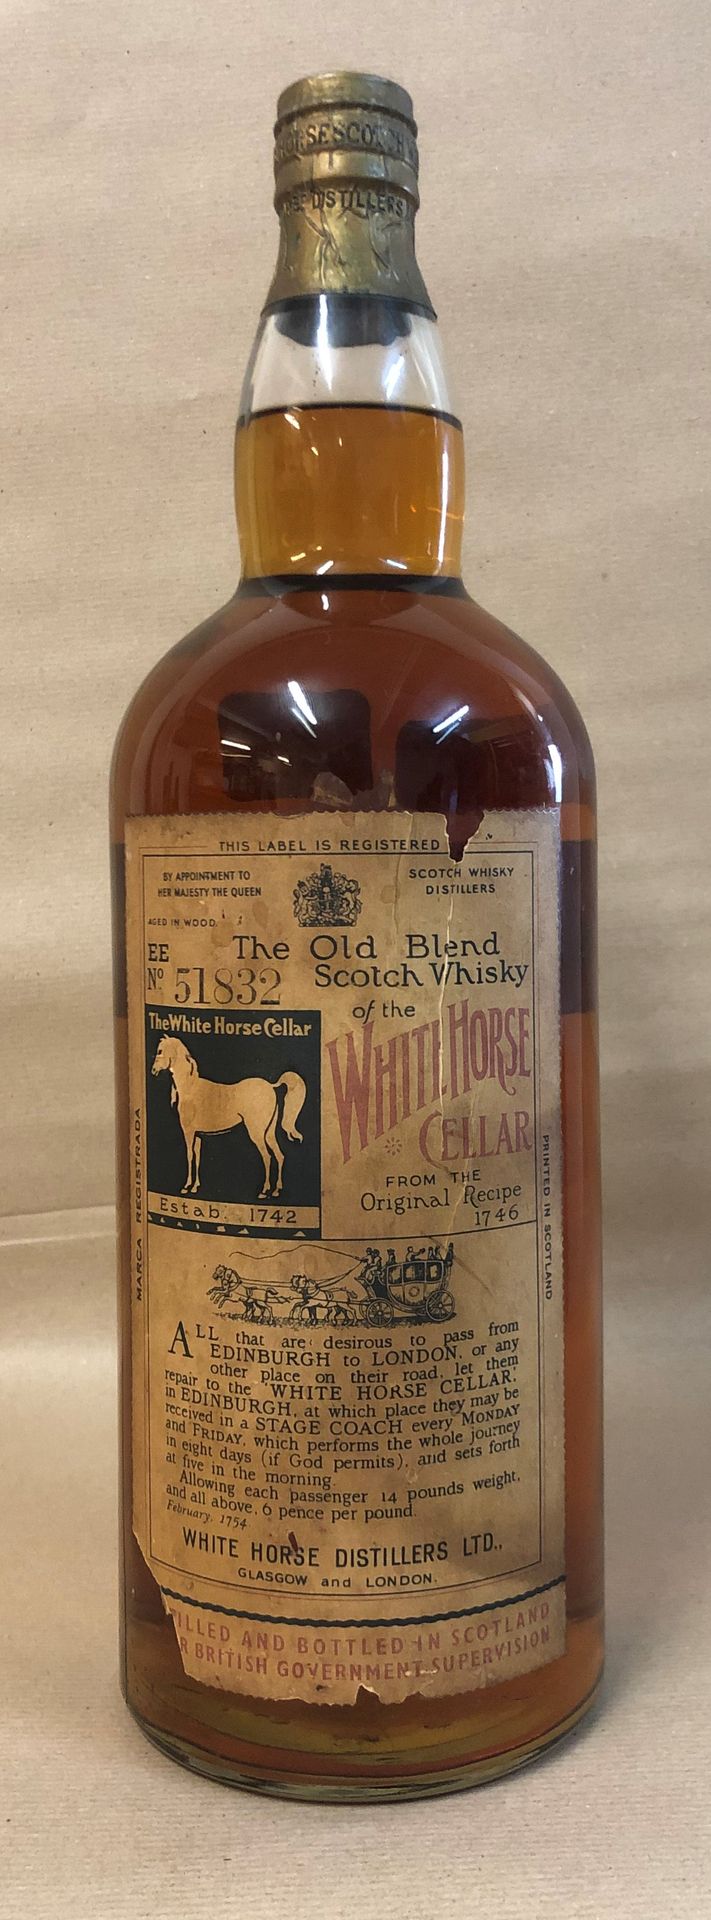 Null 1 Jéroboam WHISKY "The Old Blend Scotch Whisky", White Horse